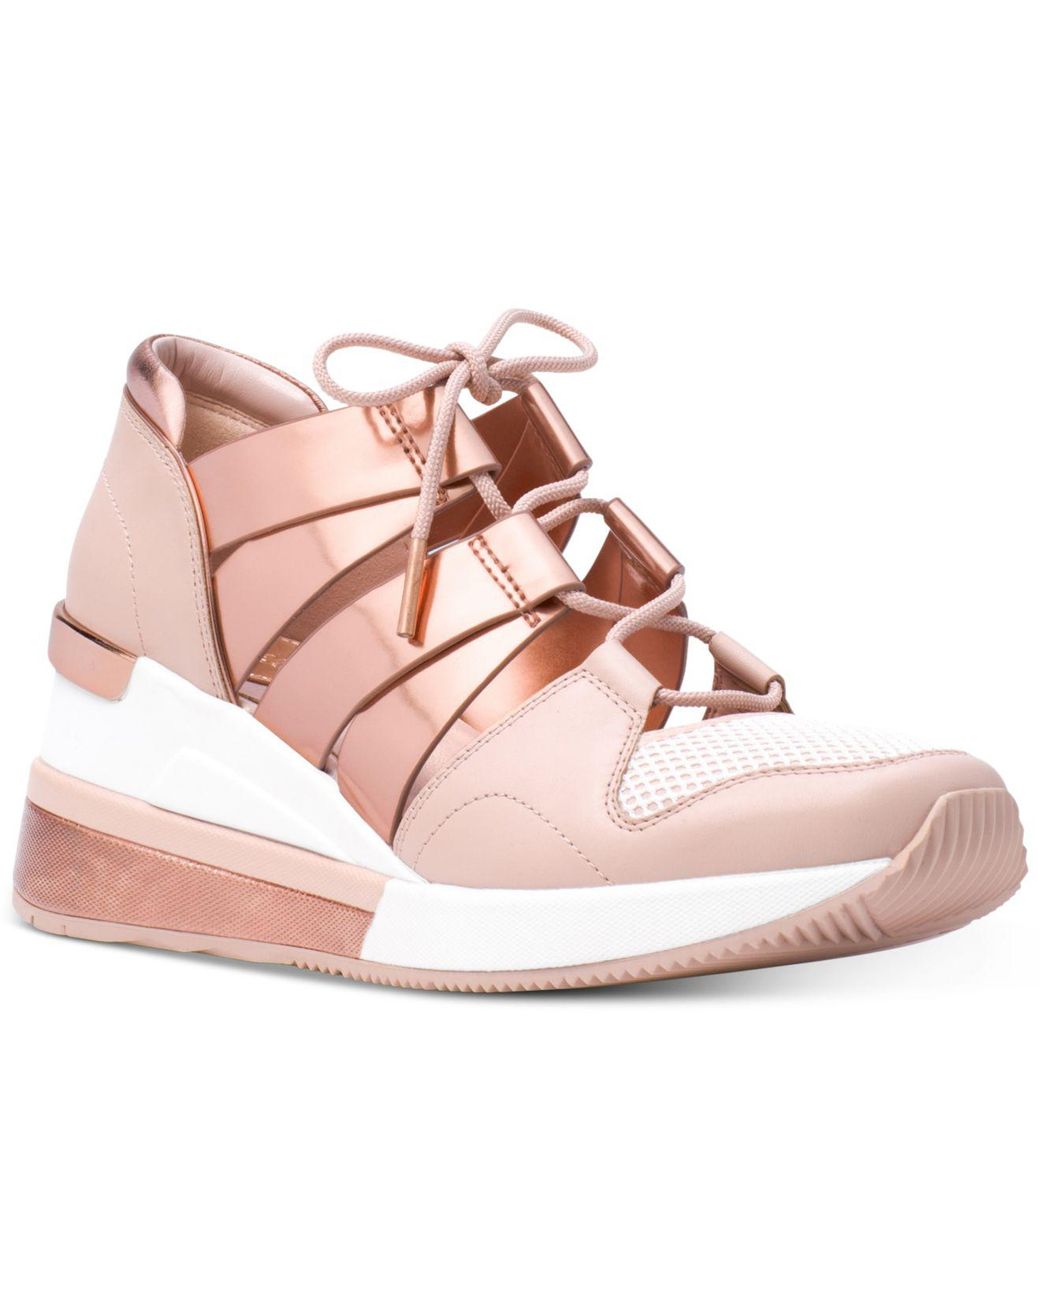 Michael Kors Denim Michael Beckett Trainer Sneakers in Soft Pink/ Rose Gold  (Pink) | Lyst Canada